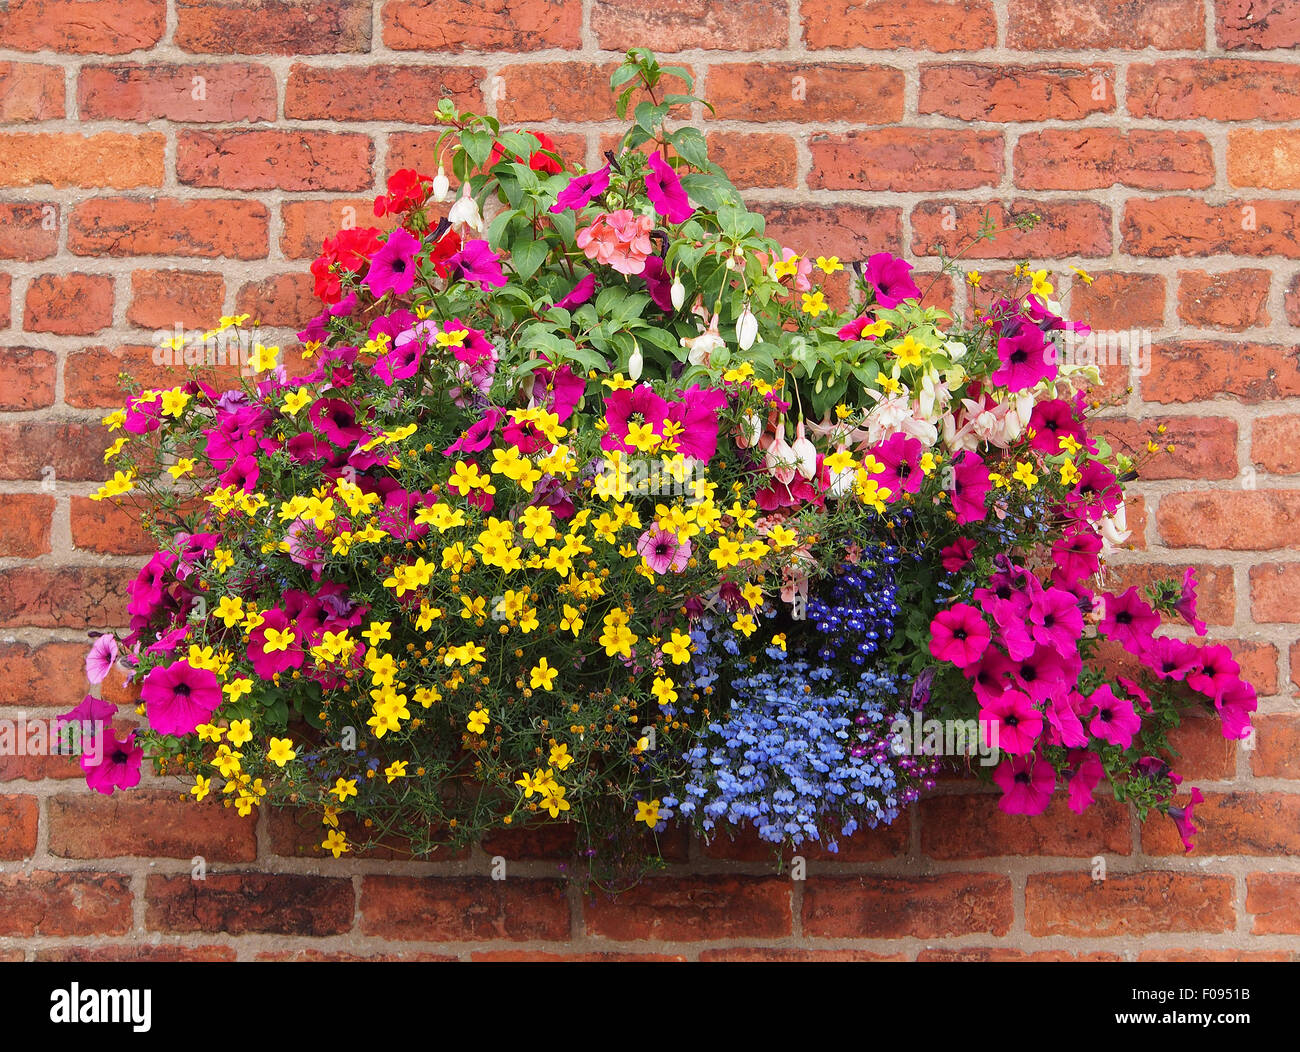 Hanging Baskets High Resolution Stock Photography and Images - Alamy